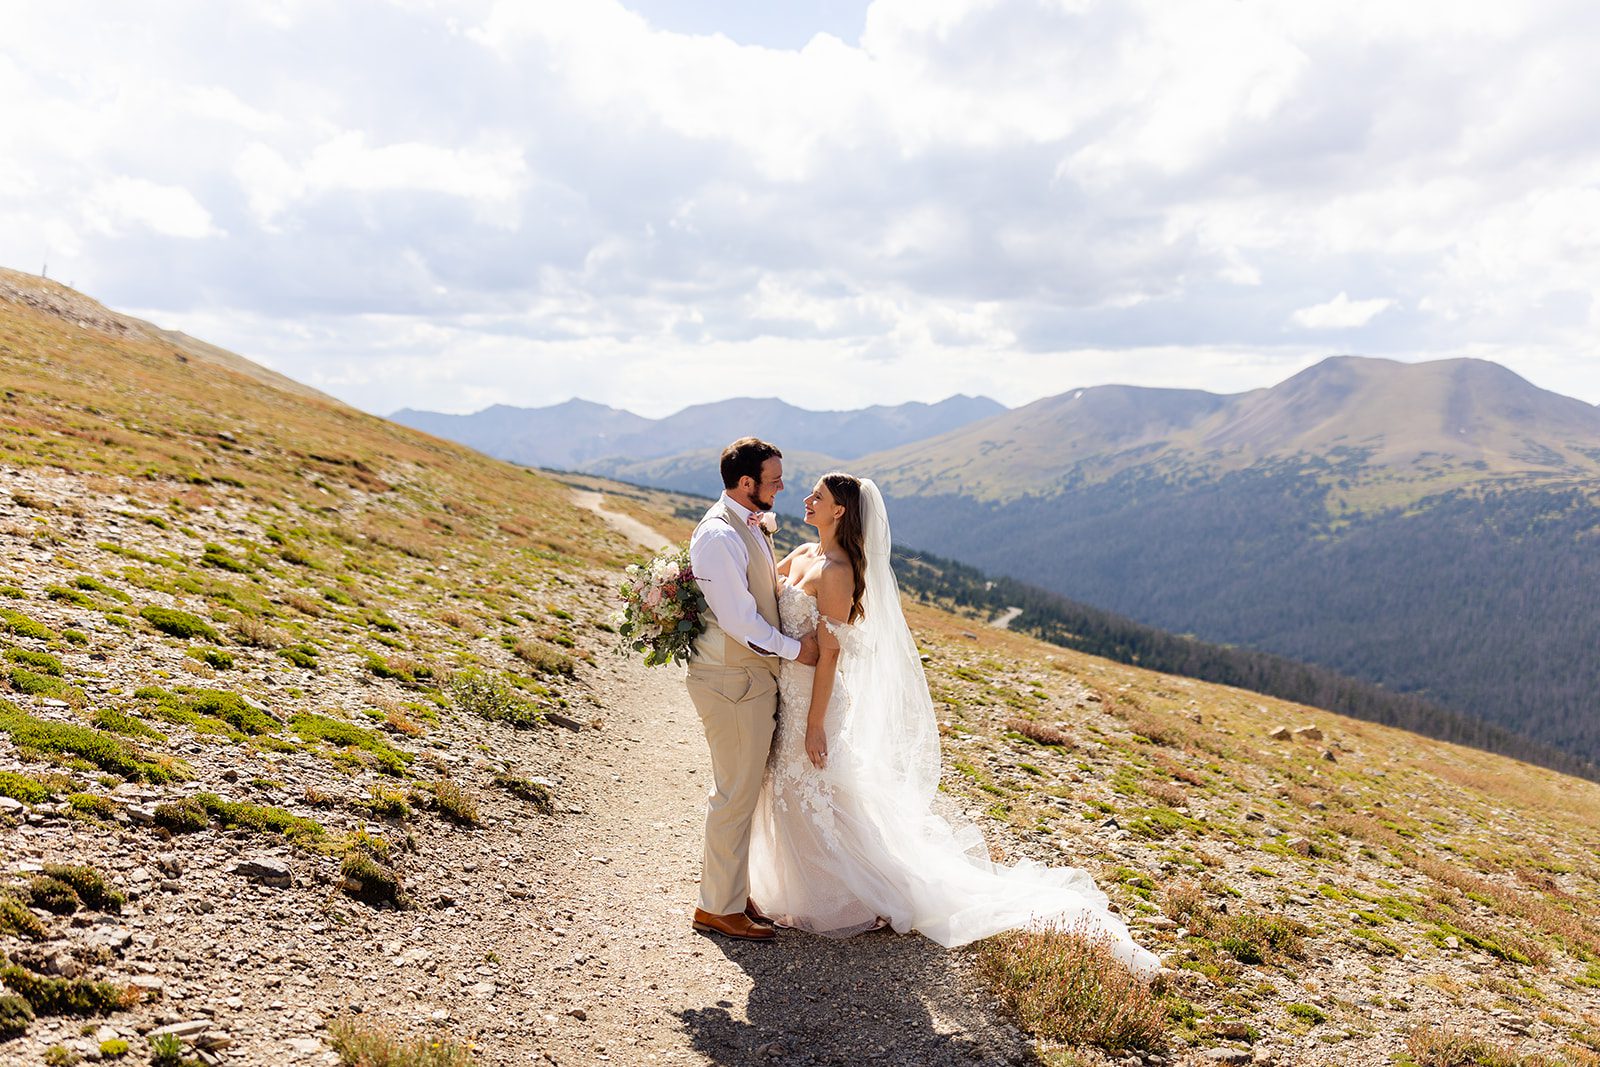 The bride and groom look lovingly at each other on the trail. 